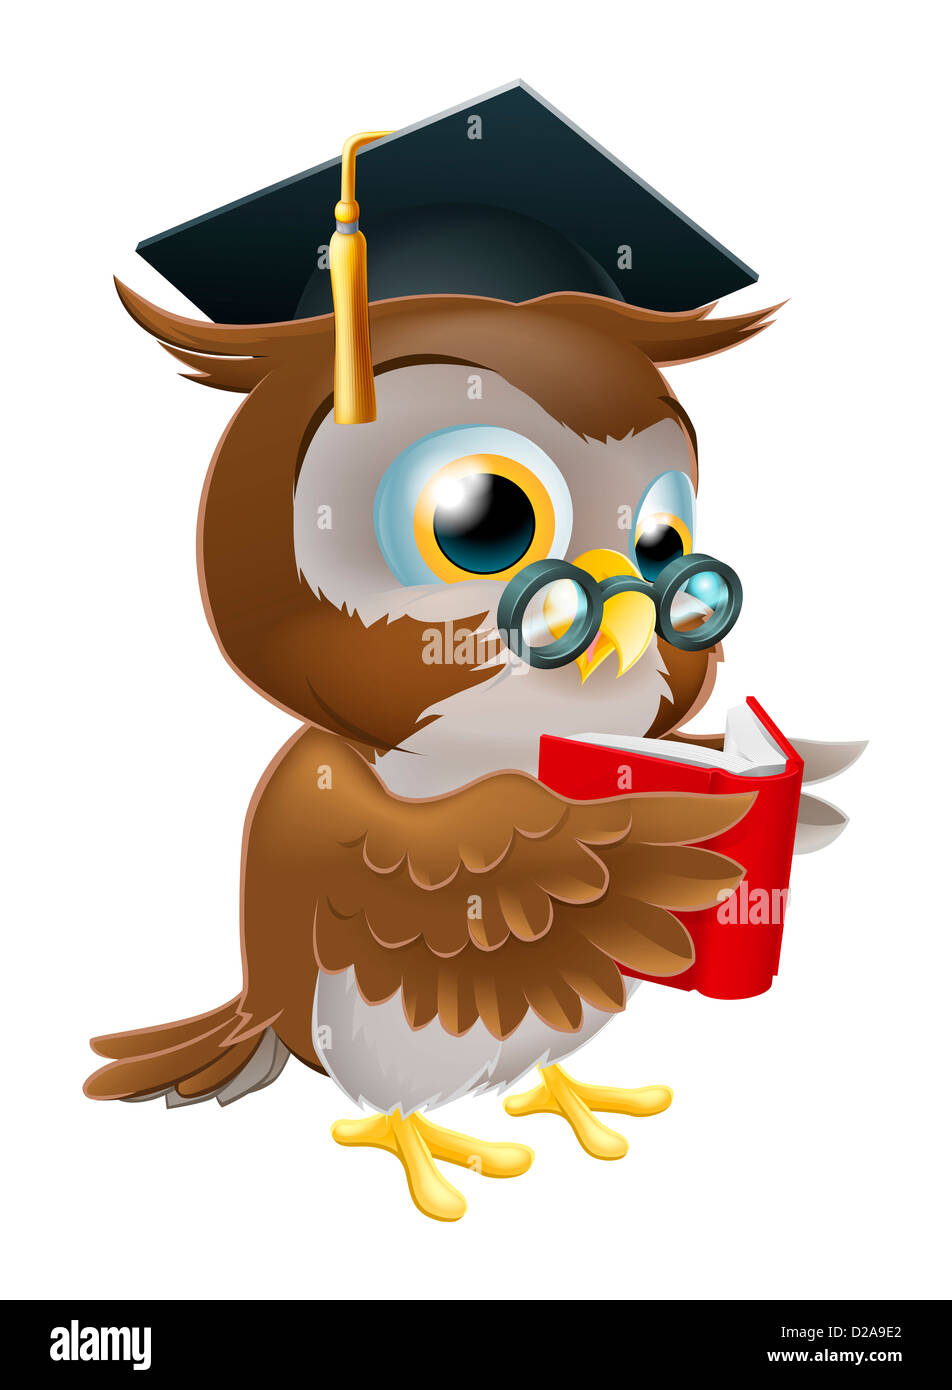 An illustration of a wise owl reading, wearing glasses and a mortar board convocation hat. Stock Photo